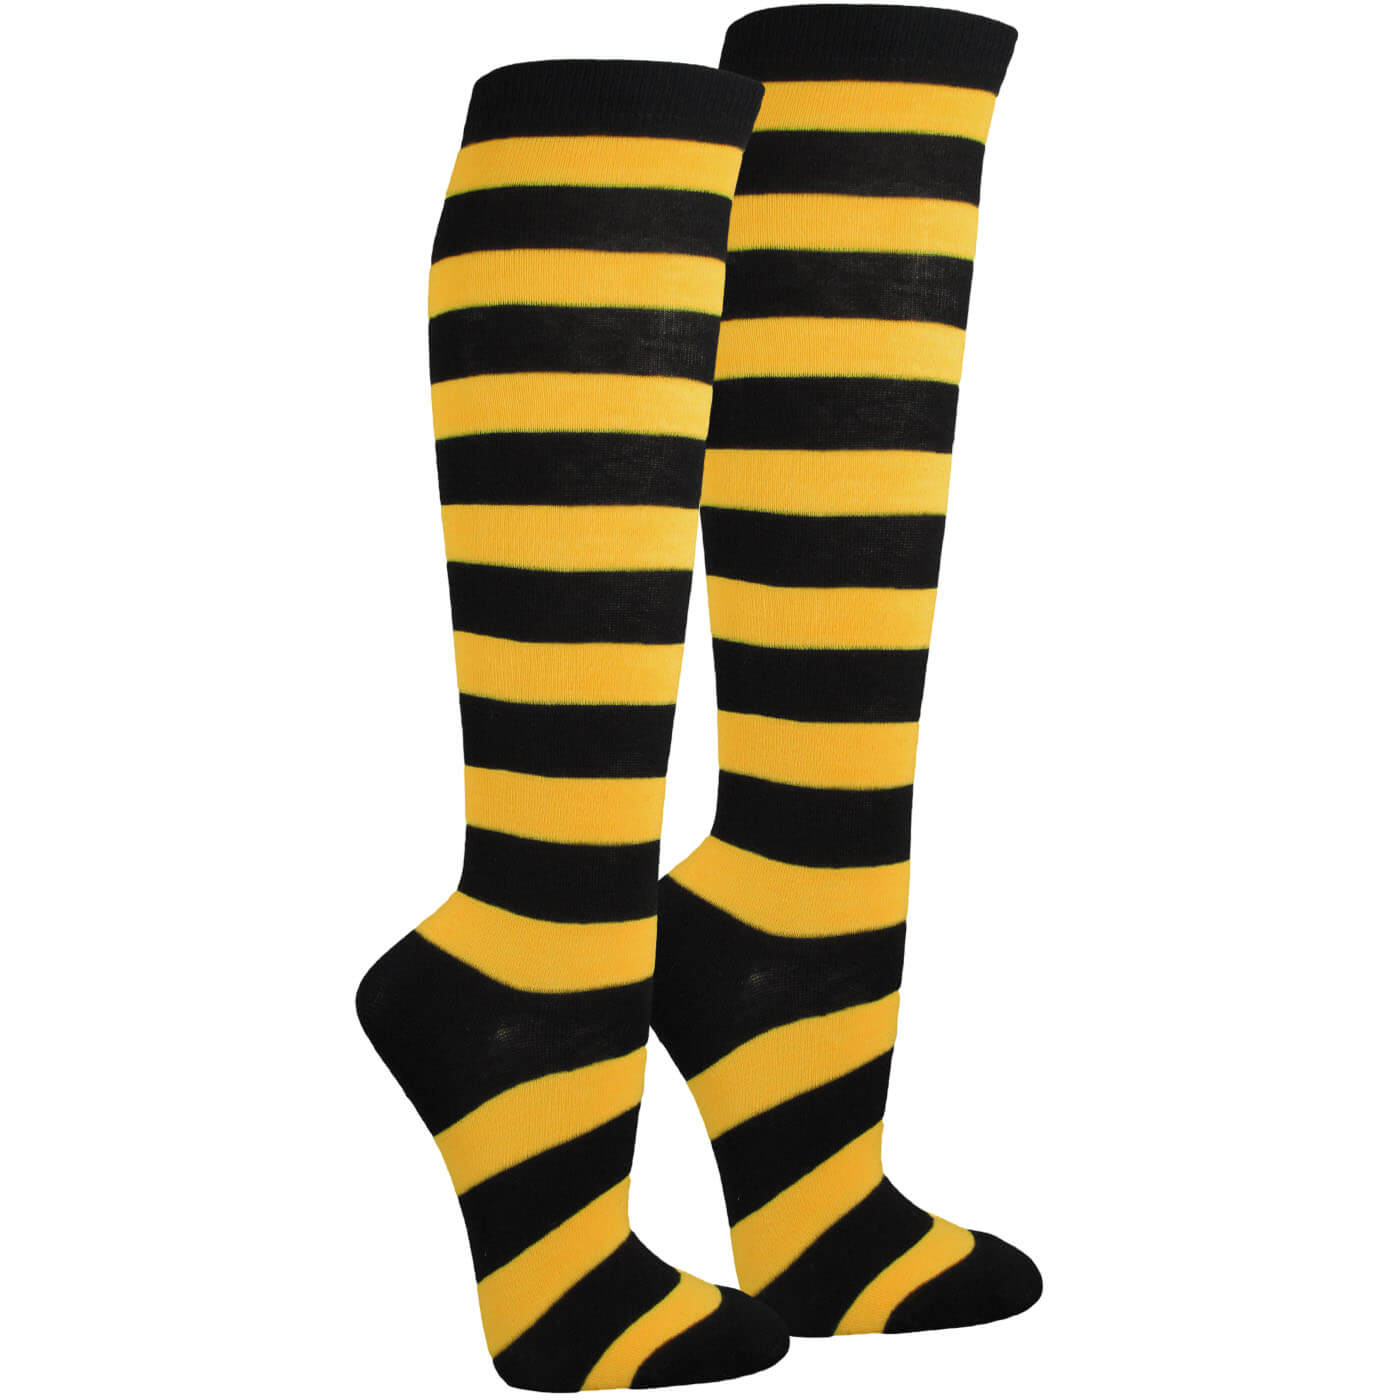 Golden Yellow and Black Wide Striped Knee High Socks for Women (1Pair)